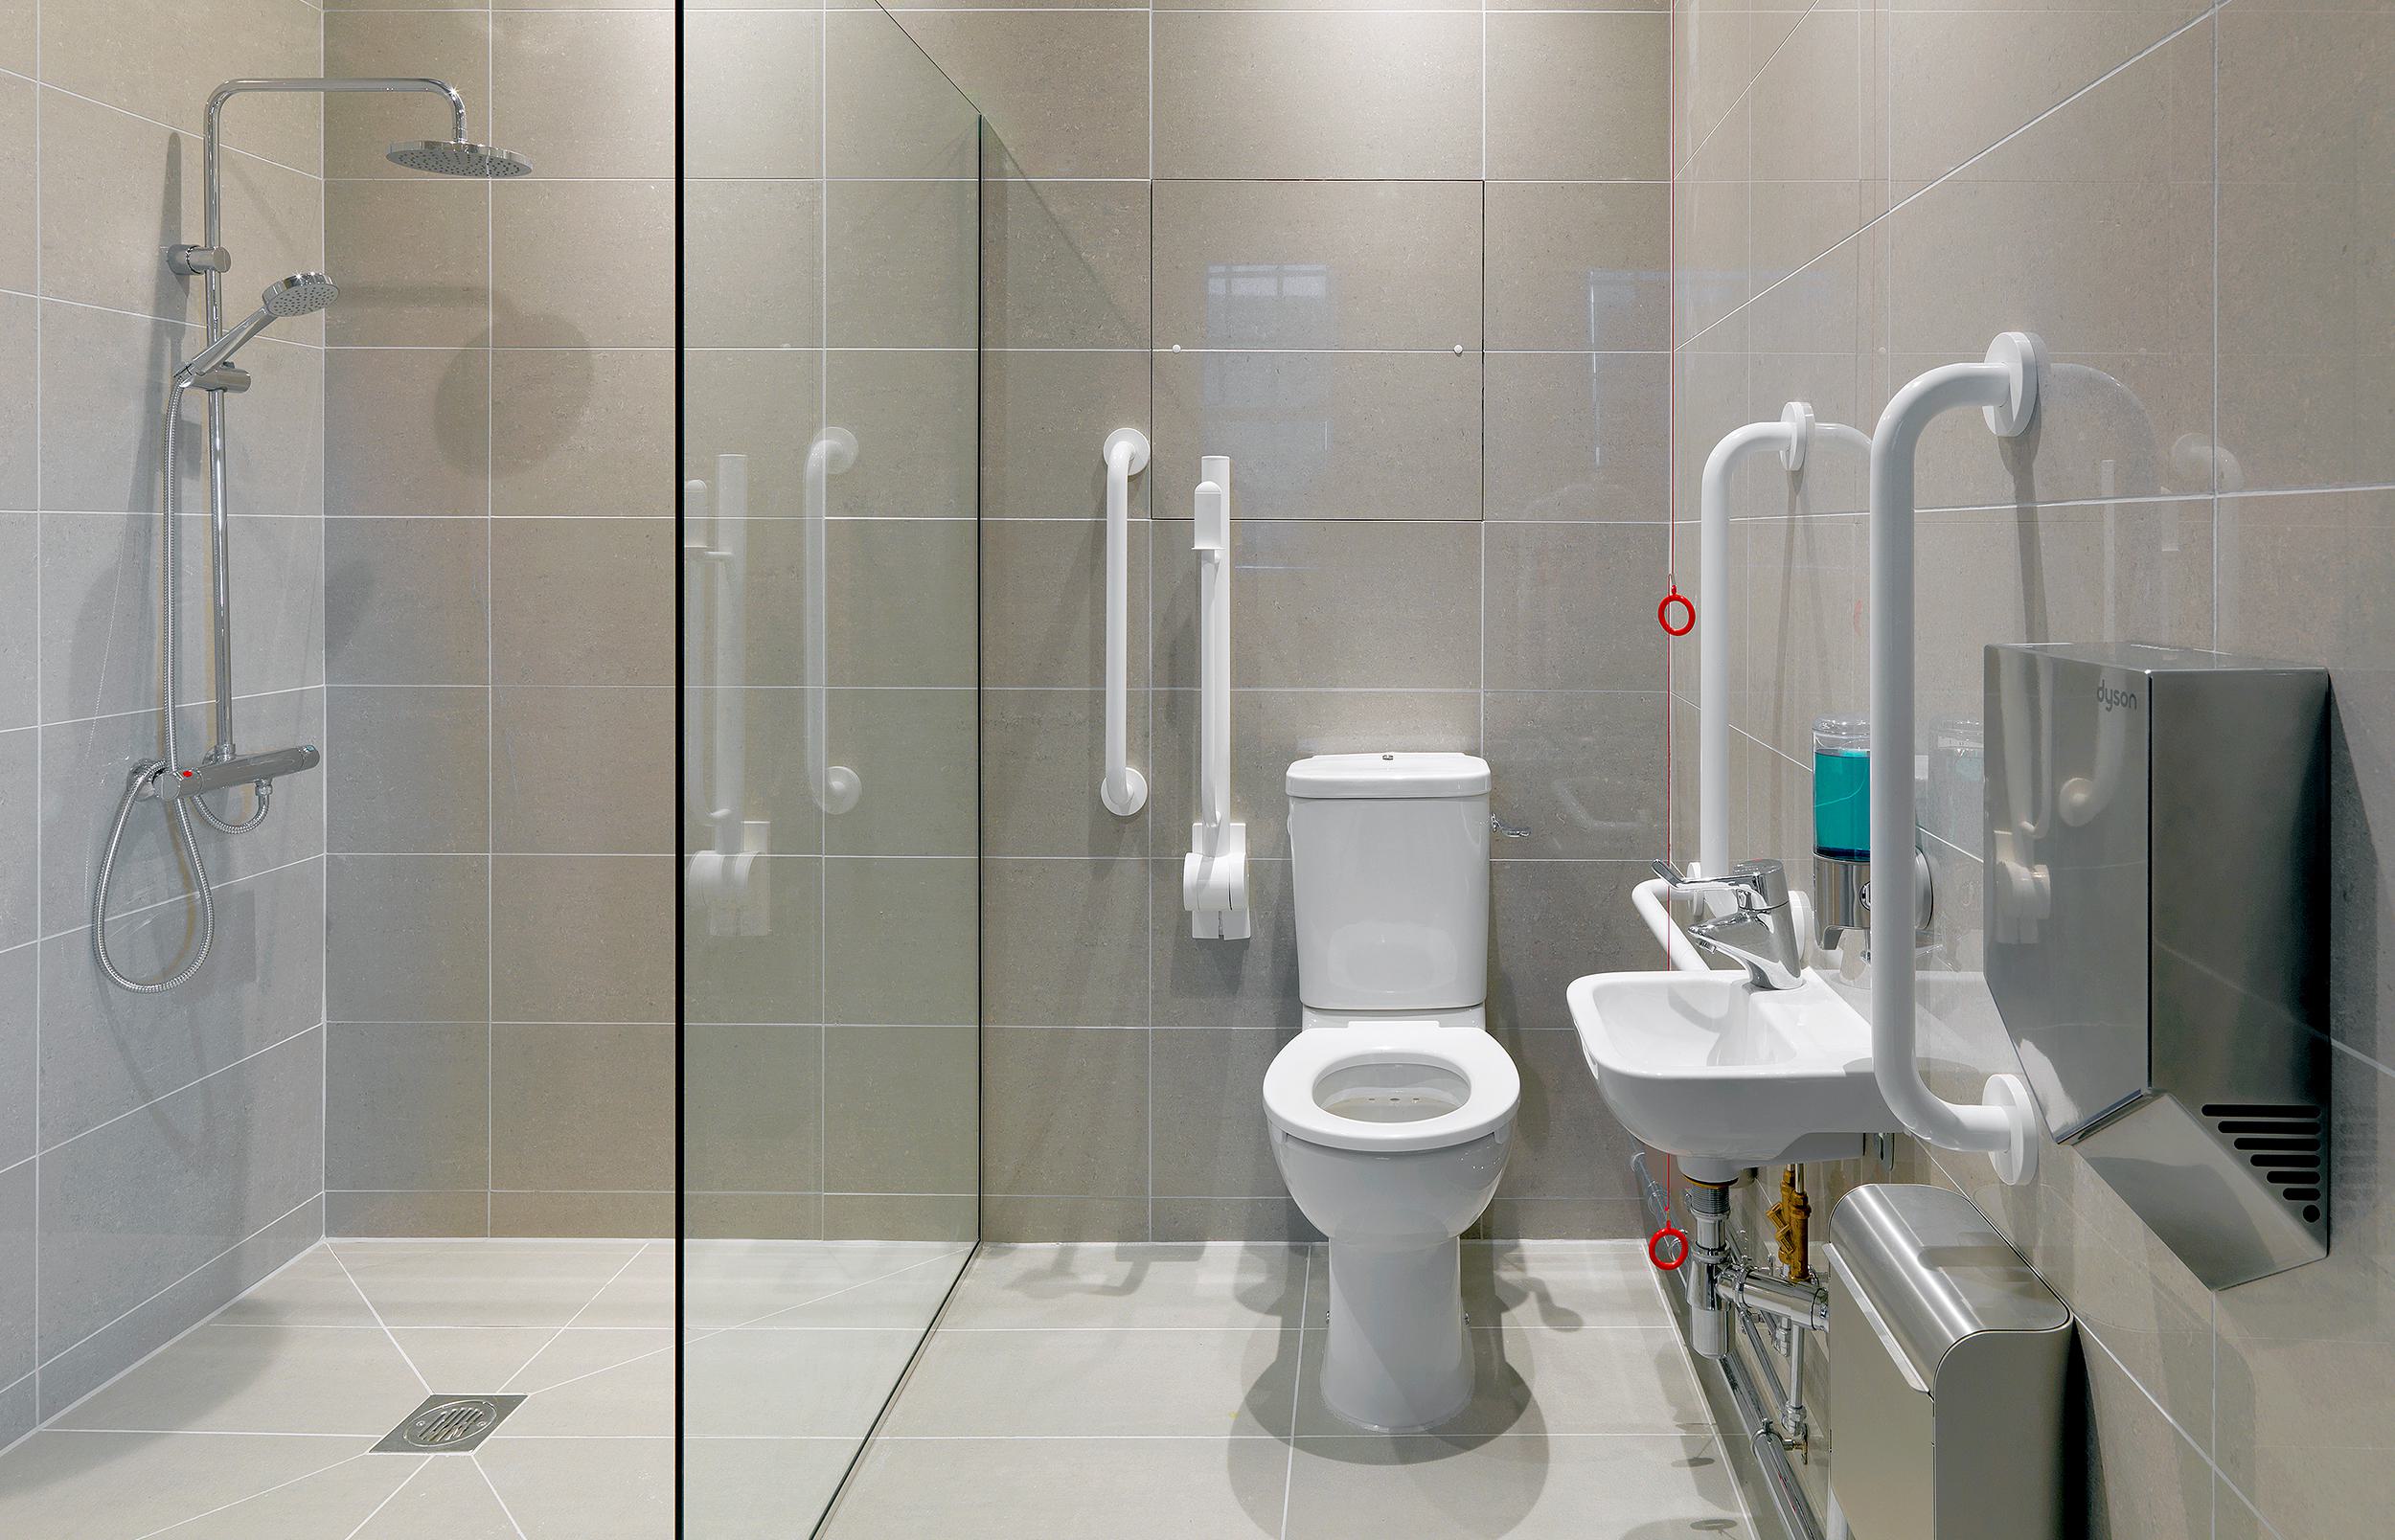 It has access to a disabled toilet, a magnetic glass board for writing, and a large screen TV.